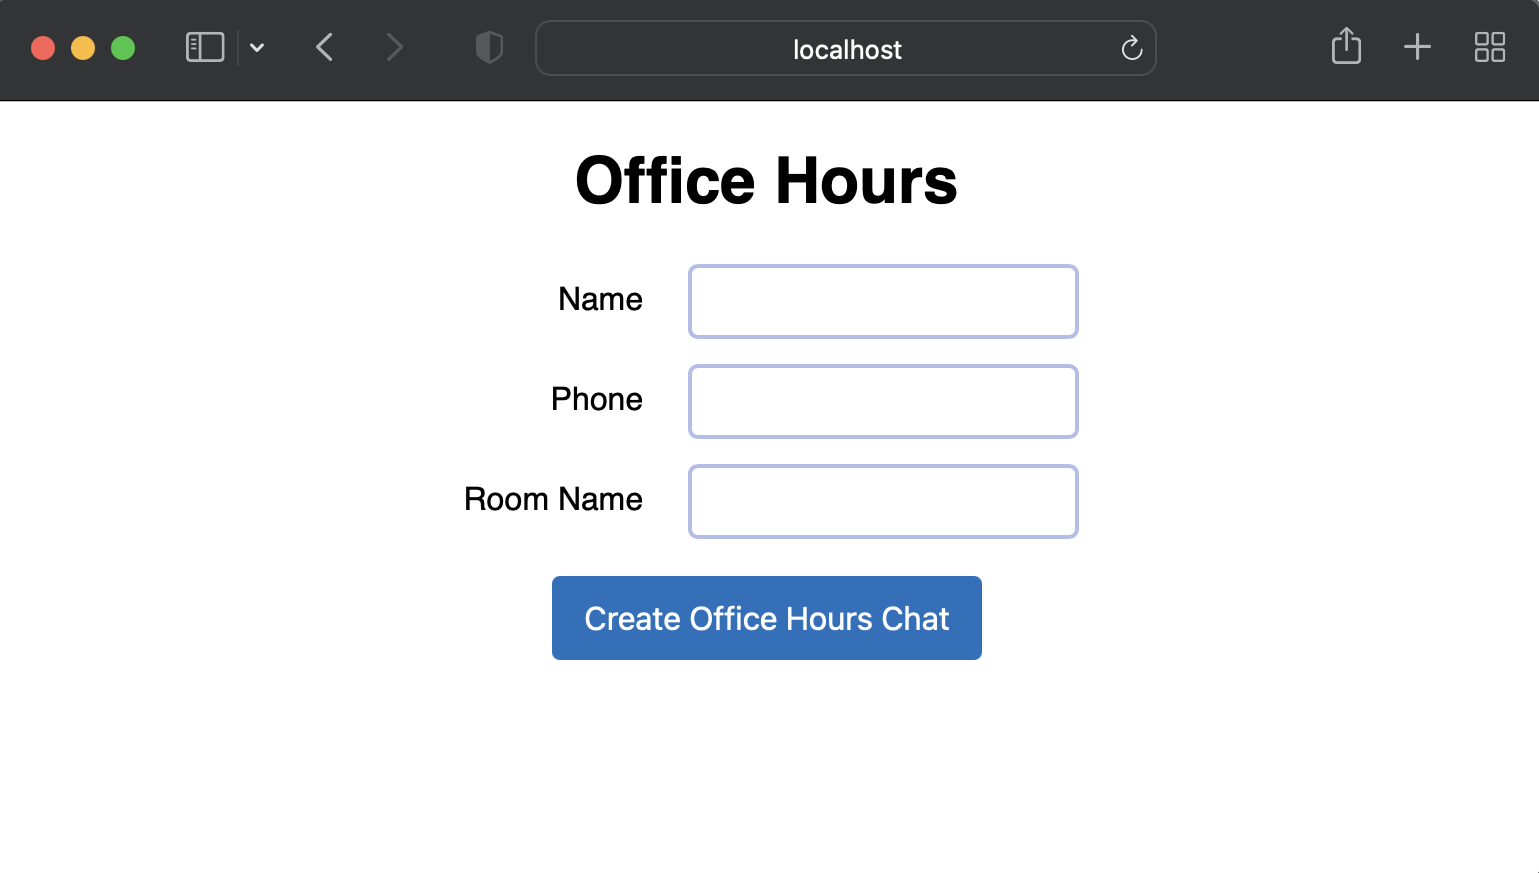 Office hours application UI, with form fields and button